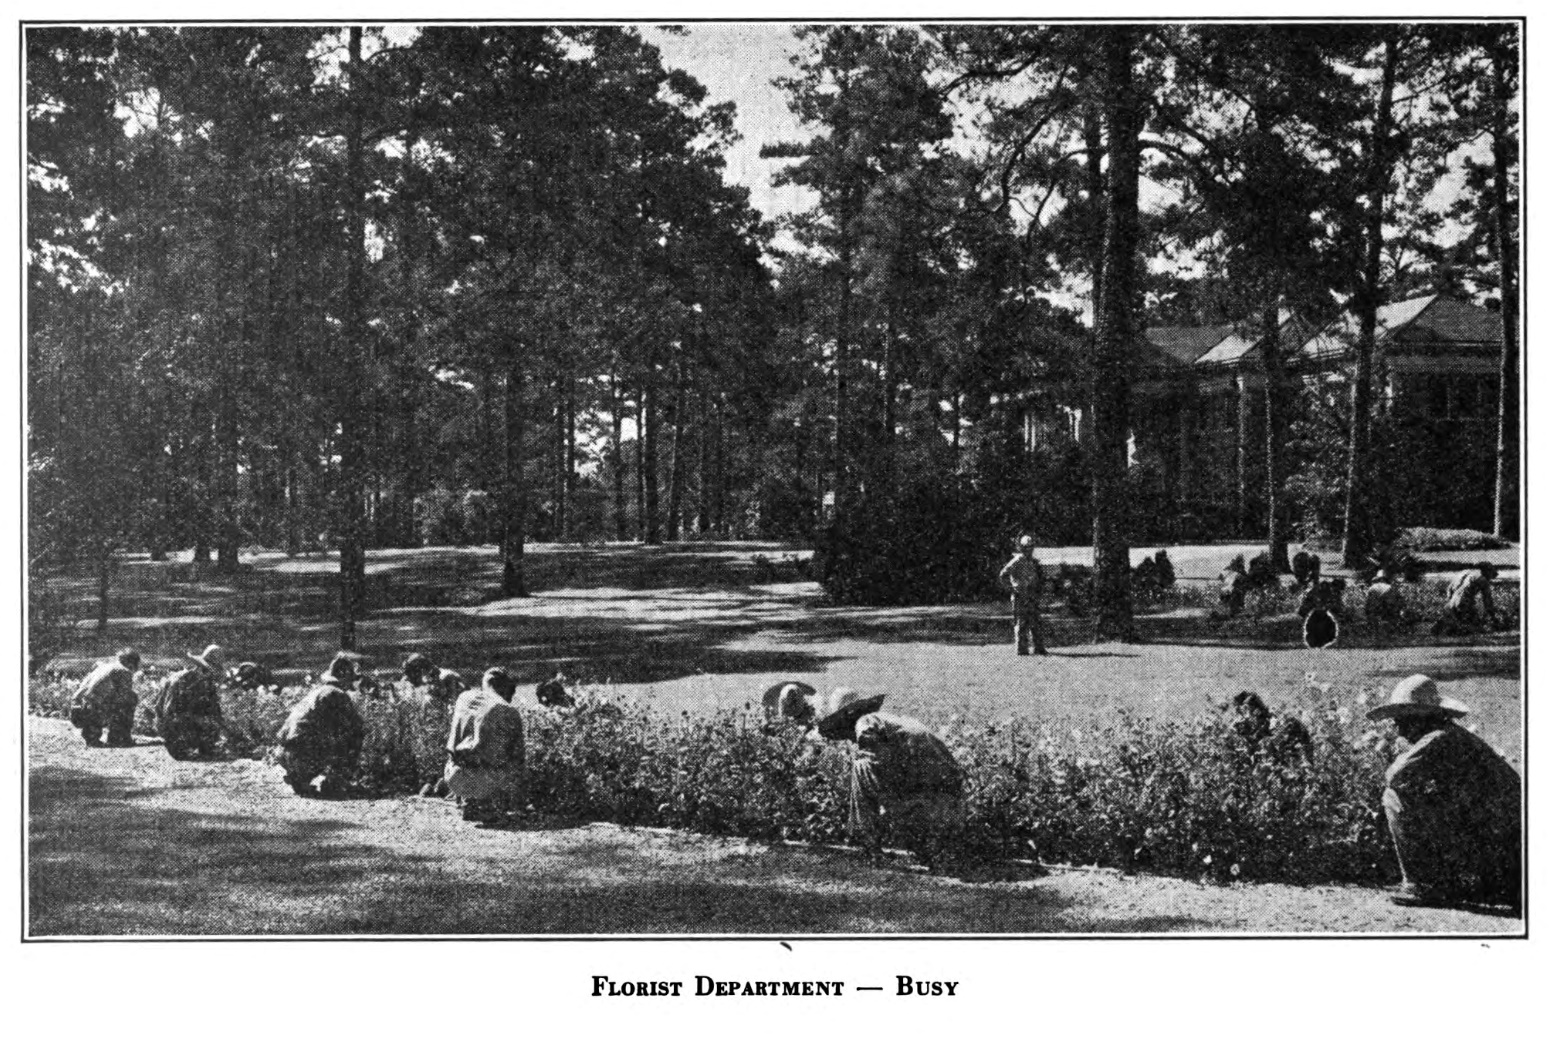 Louisiana Central State Hospital florist department workers outdoors